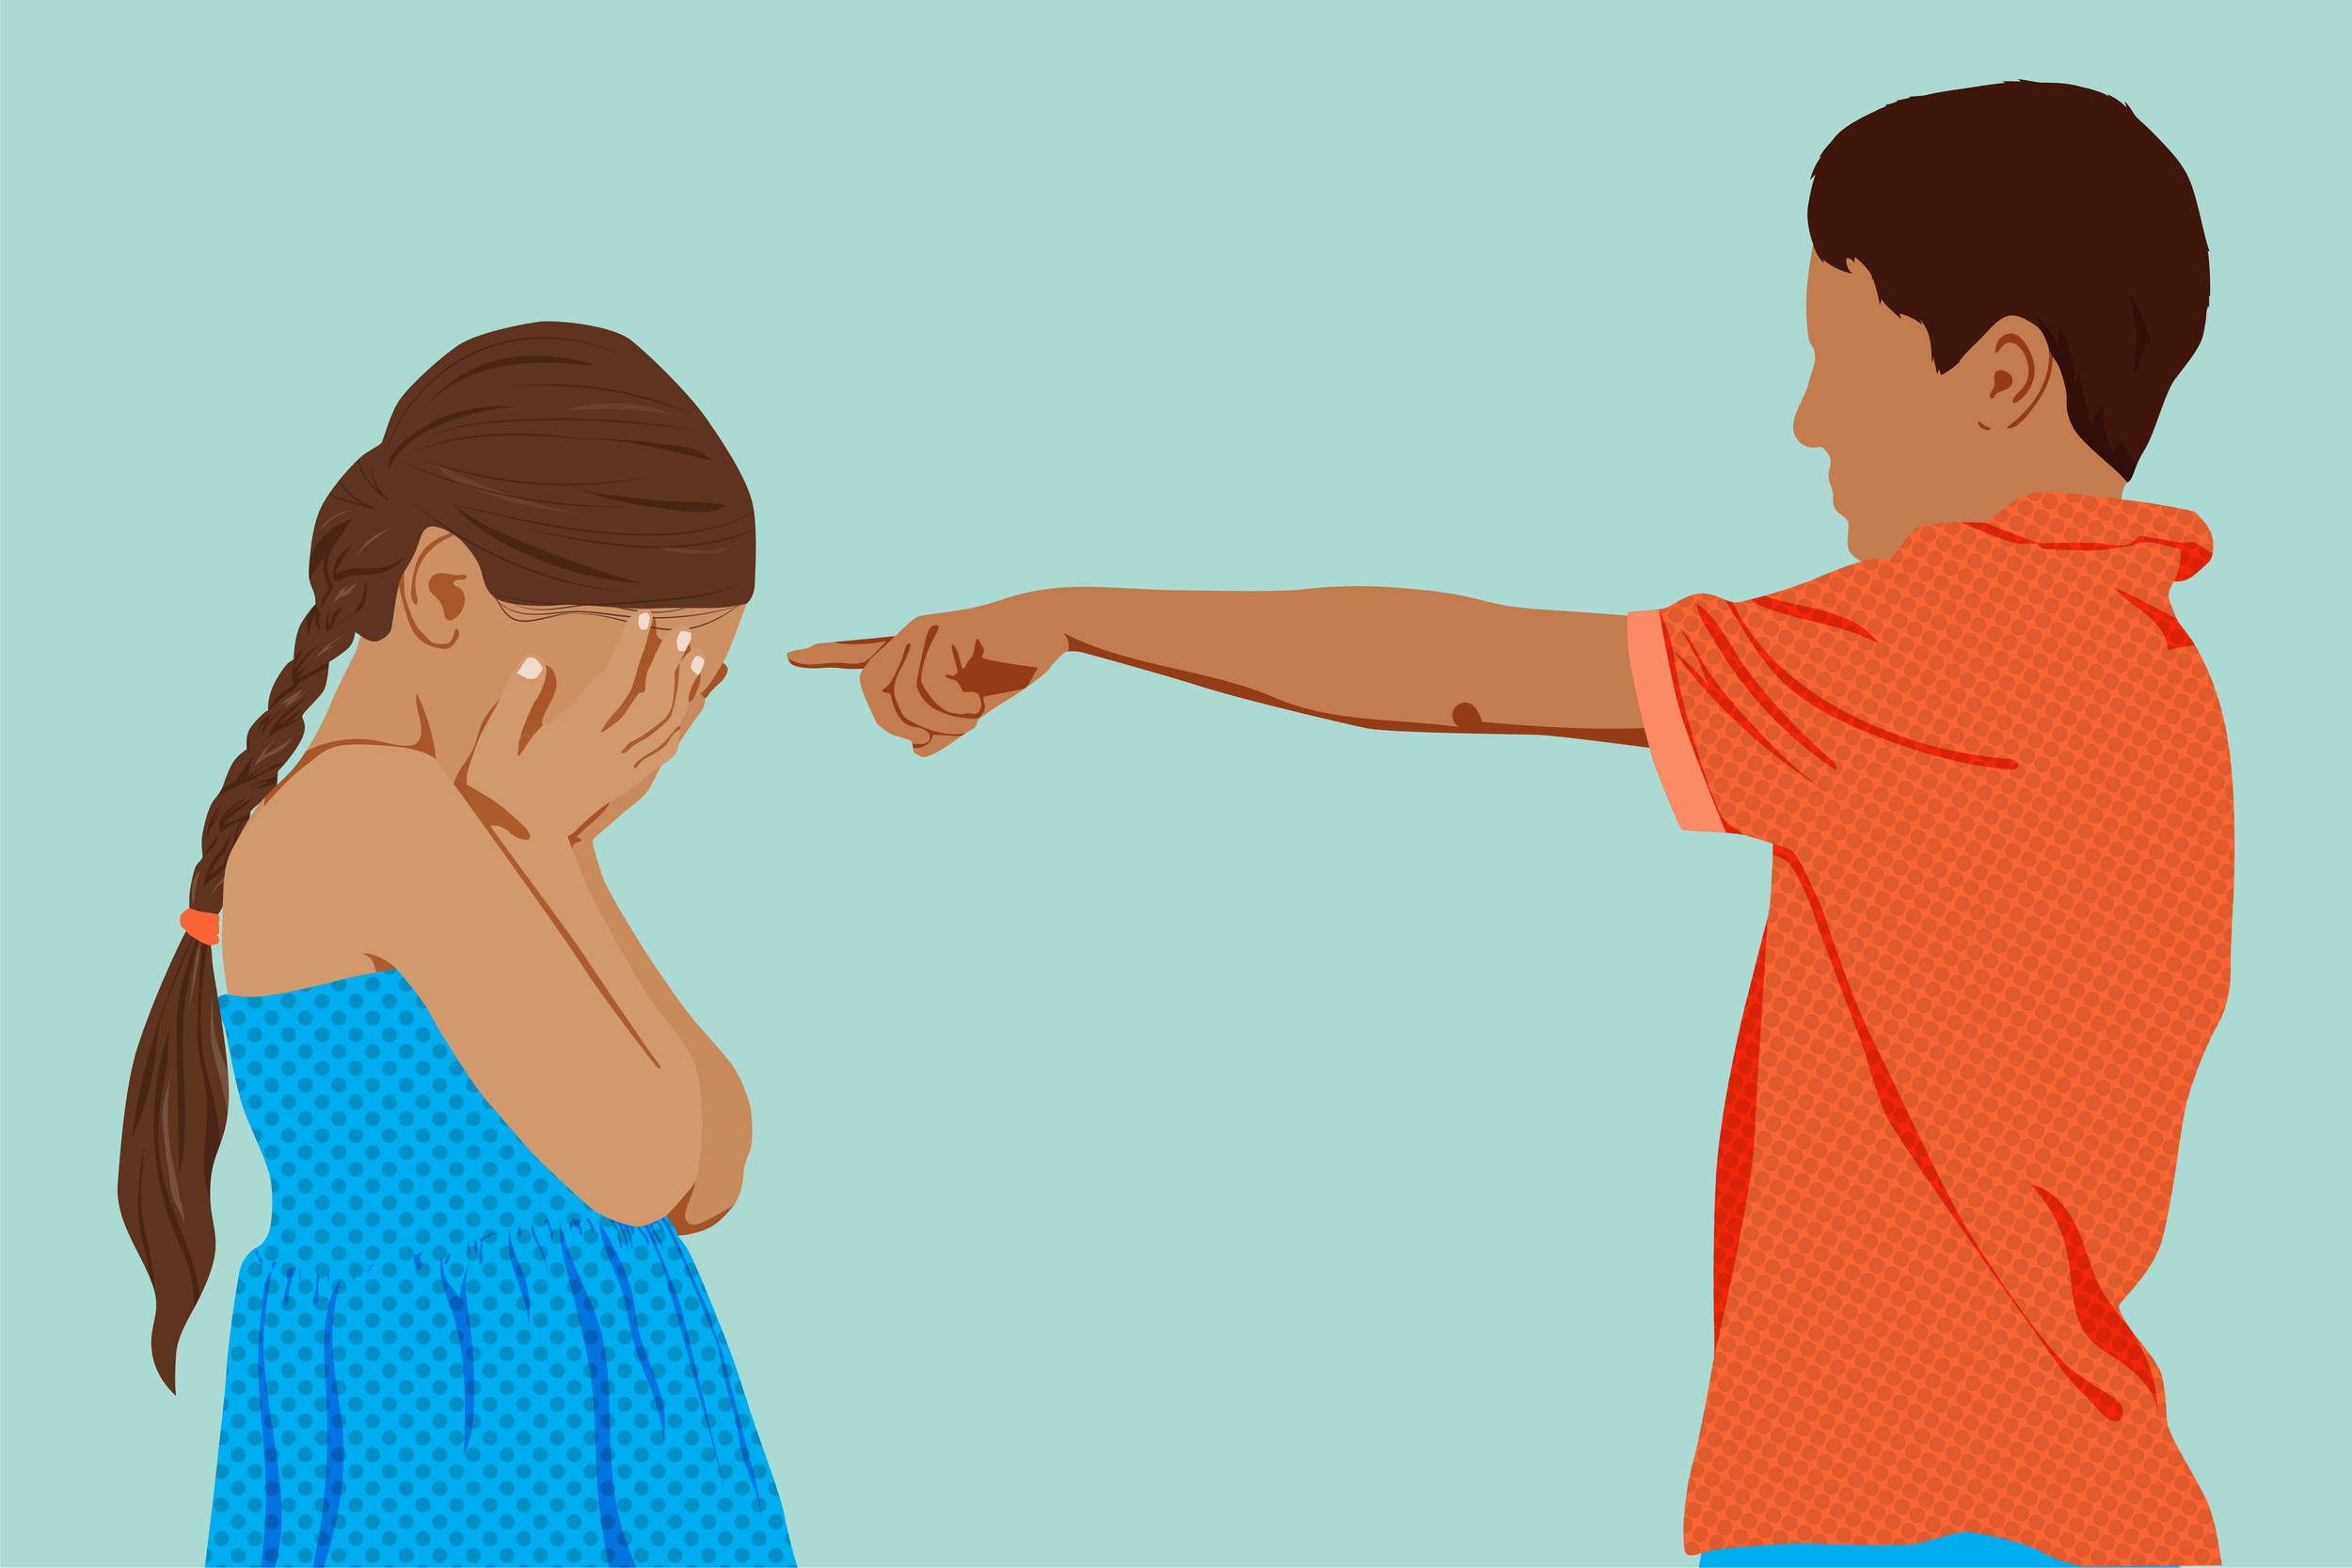 How Can I Get My Son to Stop Blaming His Younger Sibling for His Own Bad Behavior?